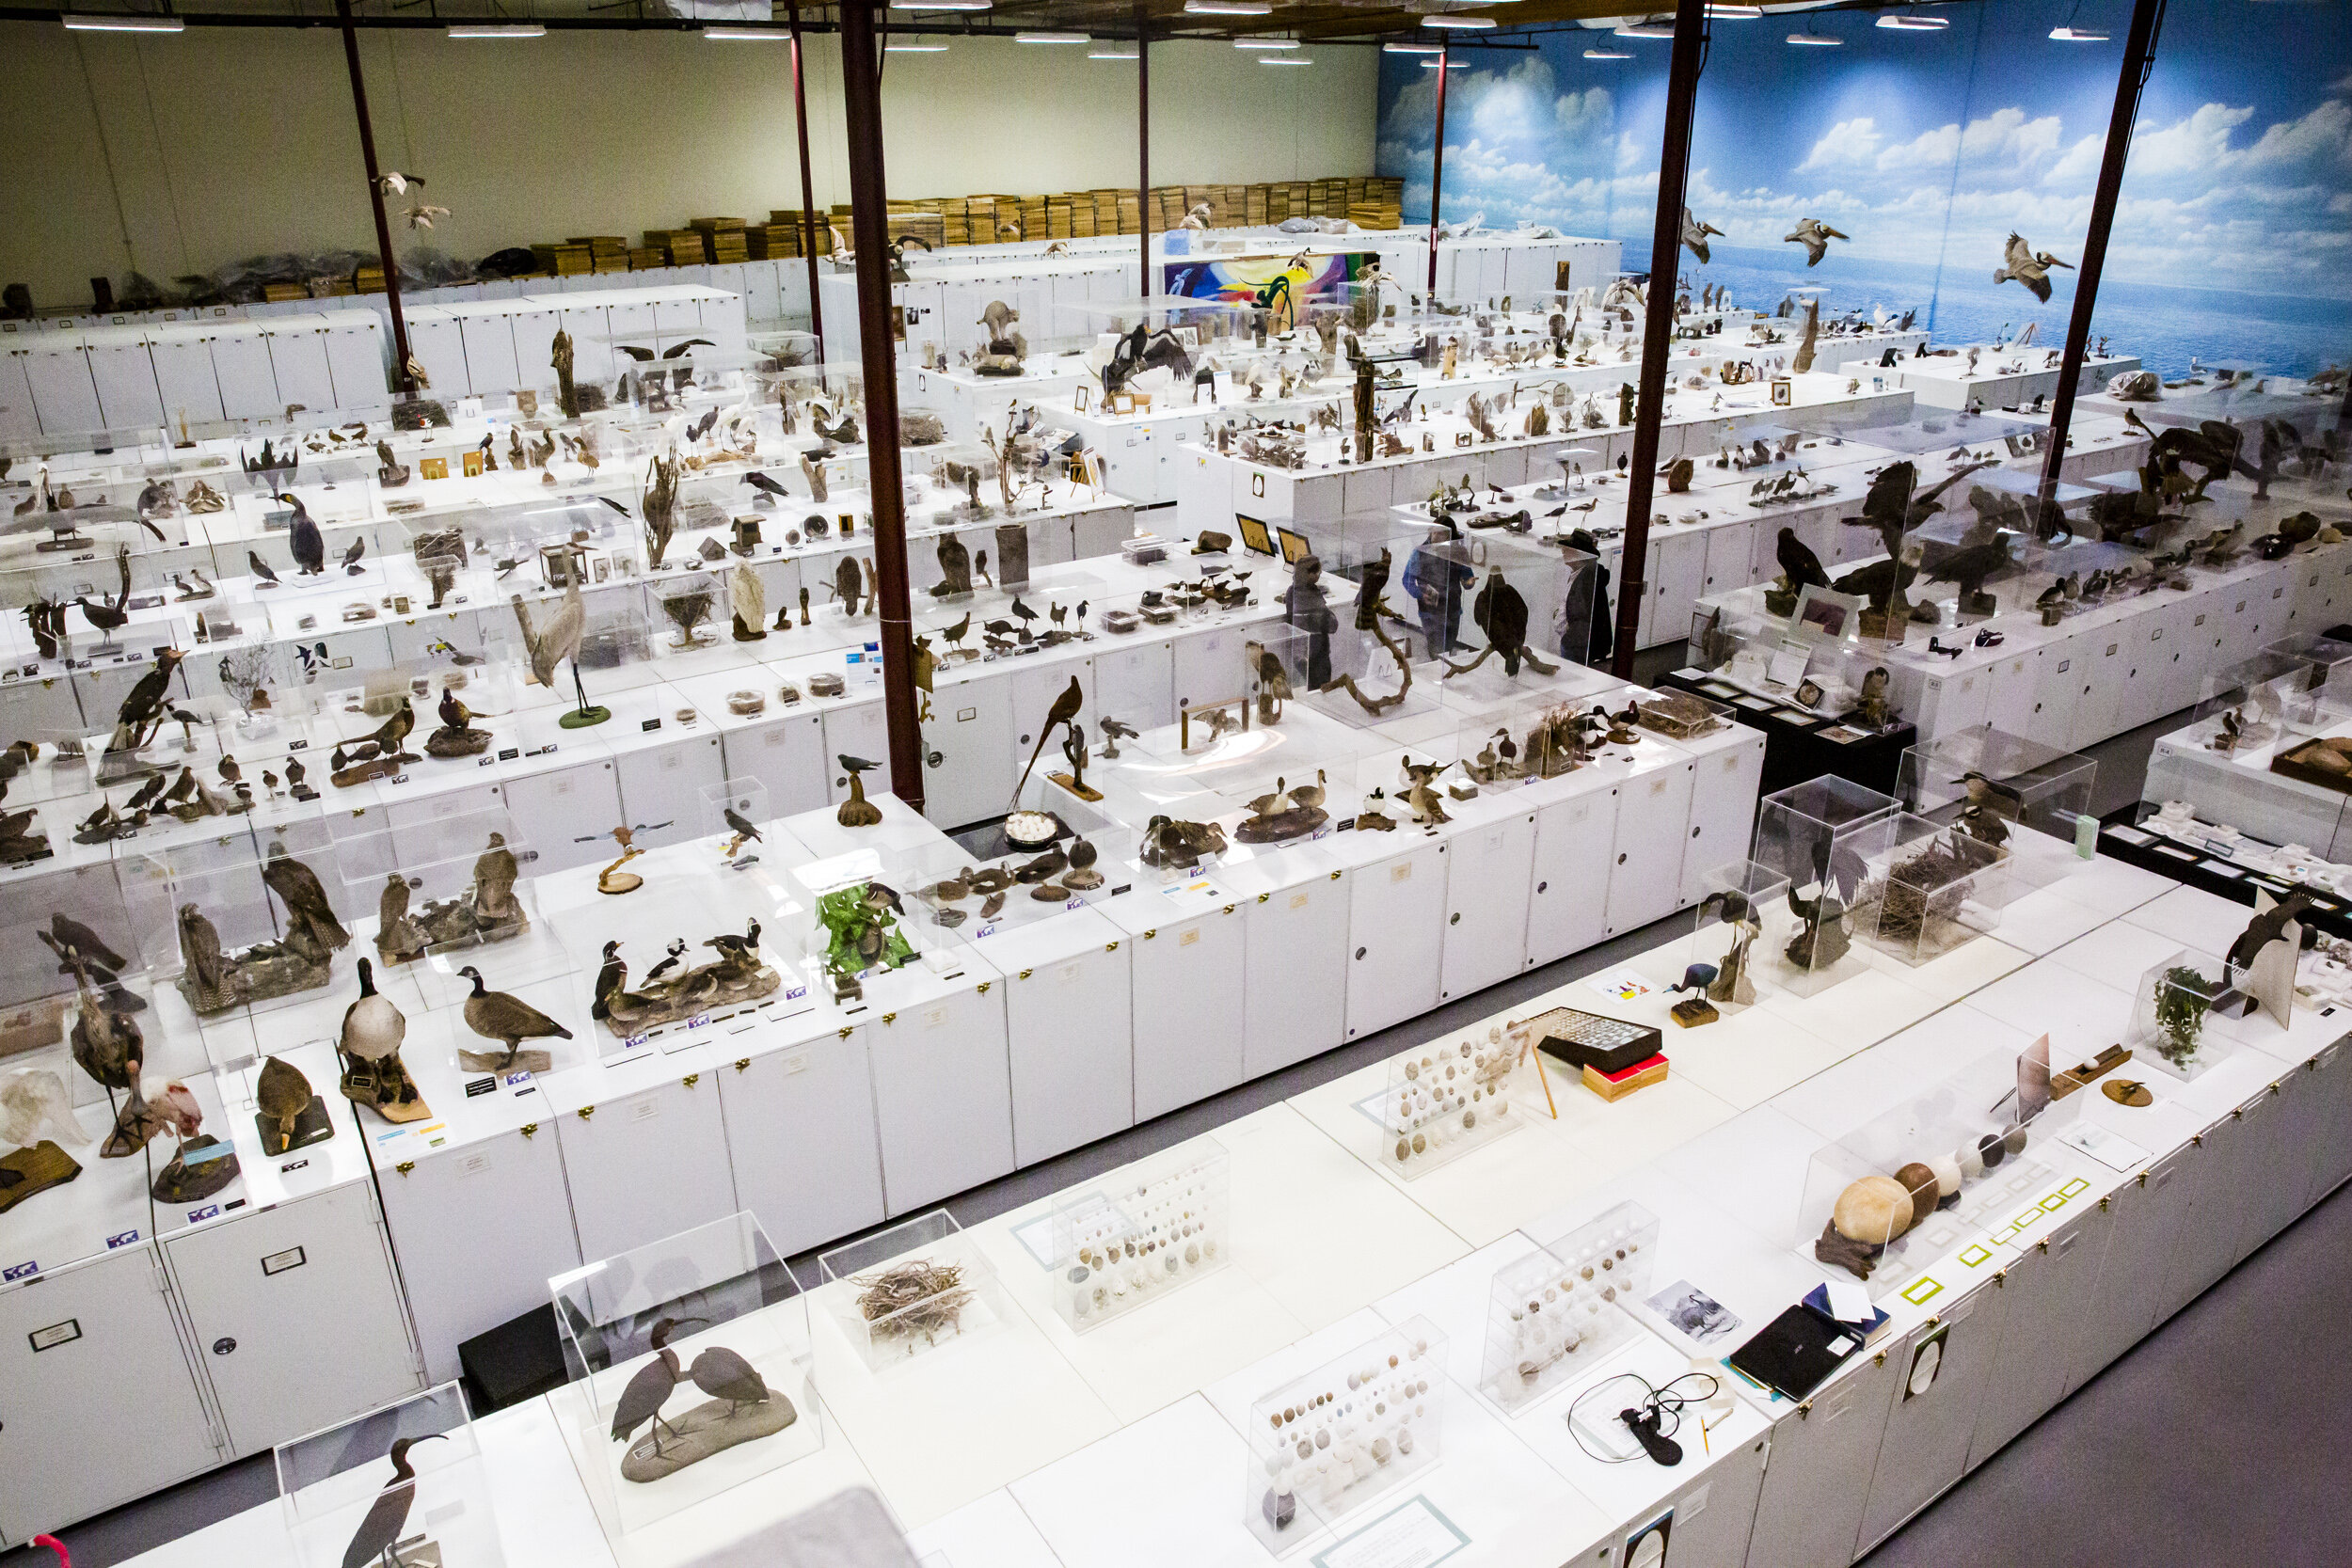 The bird nest collection at the Western Foundation of Vertebrate Zoology is massive!